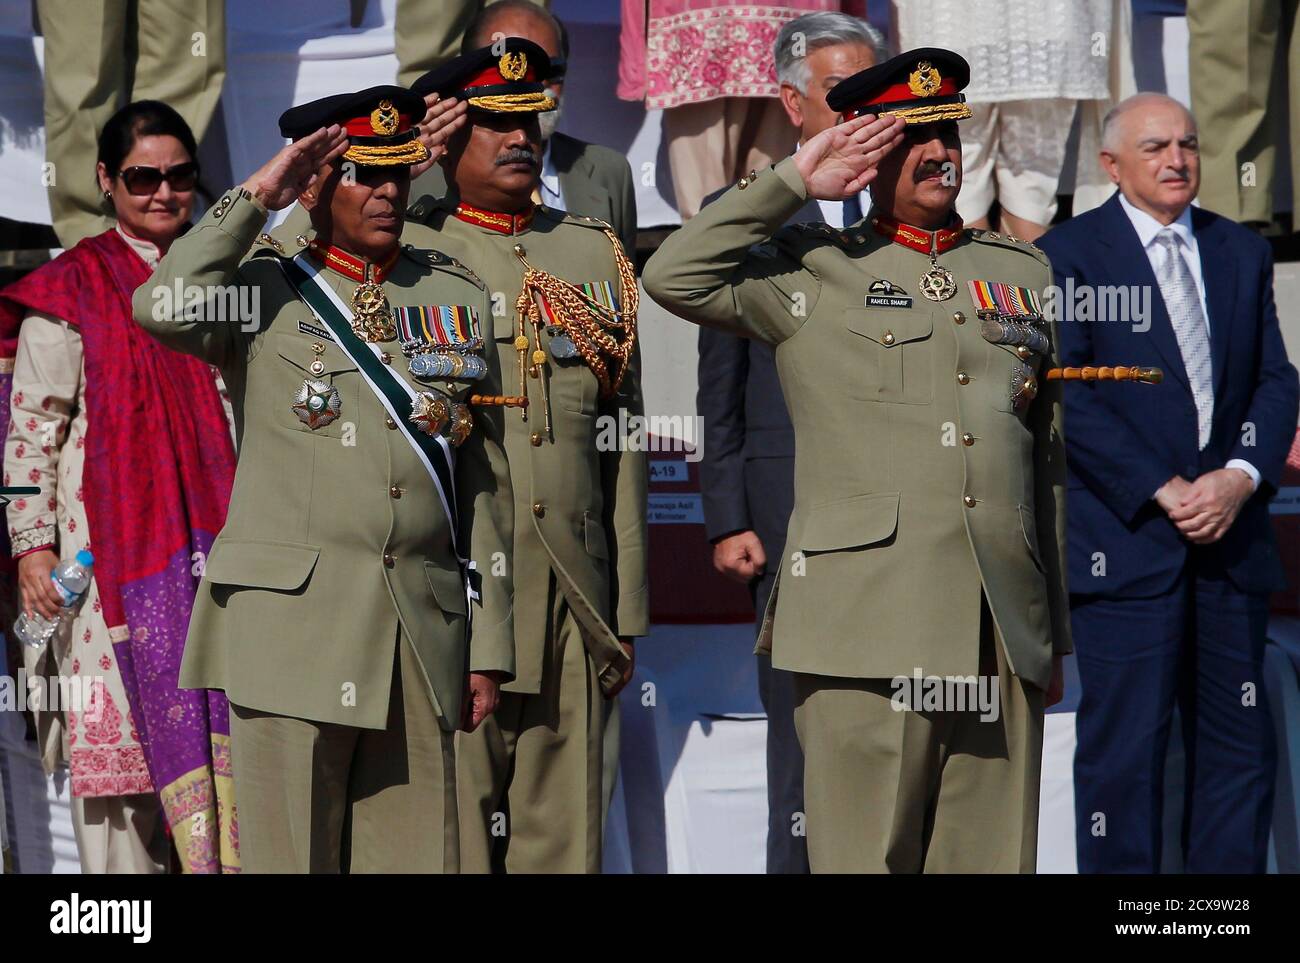 pakistans-newly-appointed-army-chief-general-raheel-sharif-r-and-outgoing-army-chief-general-ashfaq-kayani-l-salute-during-the-change-of-command-ceremony-at-the-army-headquarters-in-rawalpindi-november-29-2013-pakistan-named-sharif-a-career-infantry-officer-considered-a-moderate-as-army-chief-on-wednesday-as-the-country-fights-a-taliban-insurgency-and-seeks-accord-with-the-united-states-on-how-to-stabilise-neighbouring-afghanistan-pakistan-prime-minister-nawaz-sharif-announced-that-raheel-sharif-brother-of-a-war-hero-would-take-charge-of-the-worlds-sixth-largest-army-with-a-forma-2cx9w28.jpg